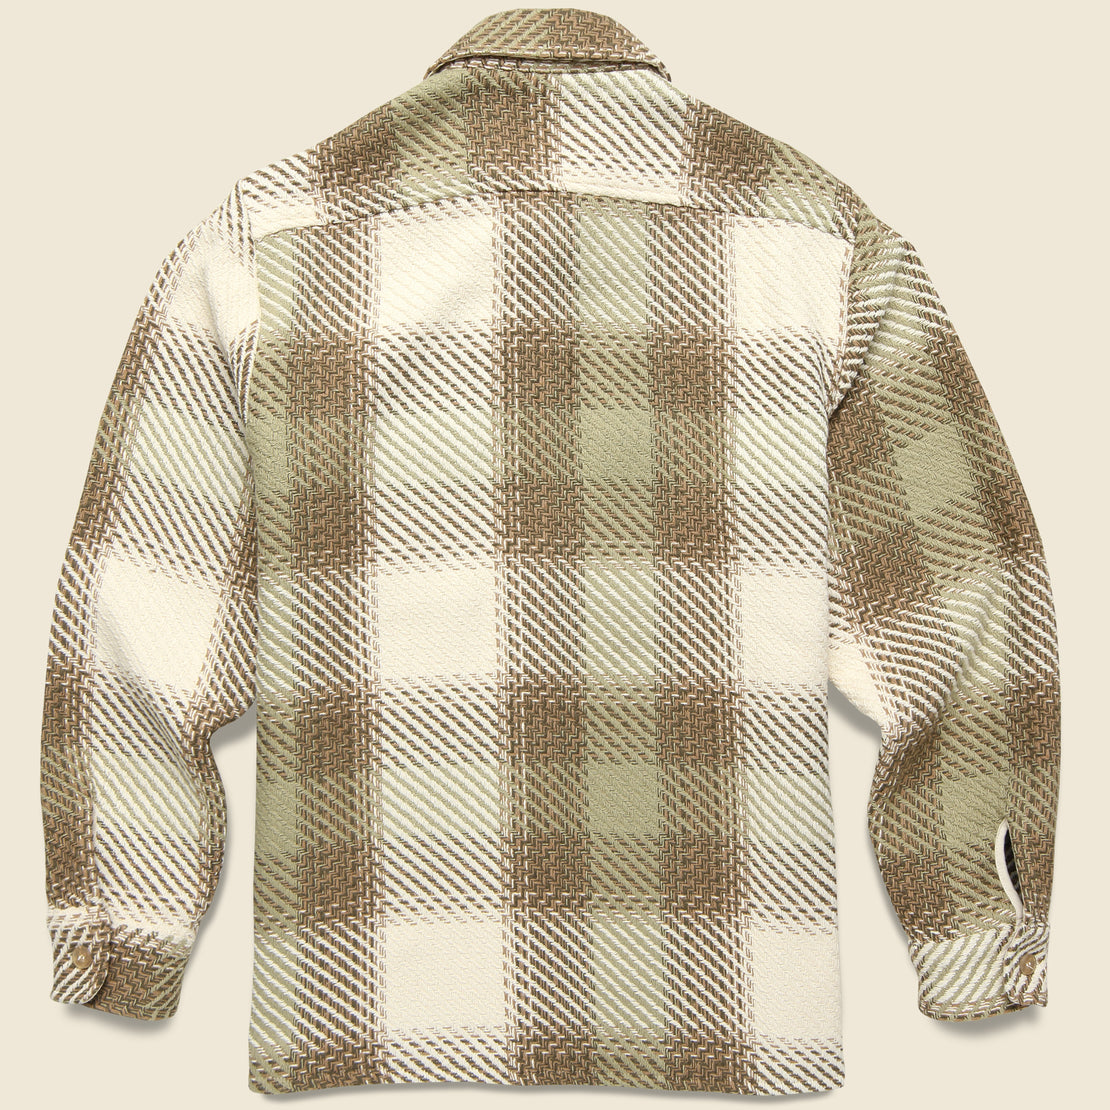 Whiting Overshirt - Sage/Ecru Ombre Check - Wax London - STAG Provisions - Tops - L/S Woven - Plaid